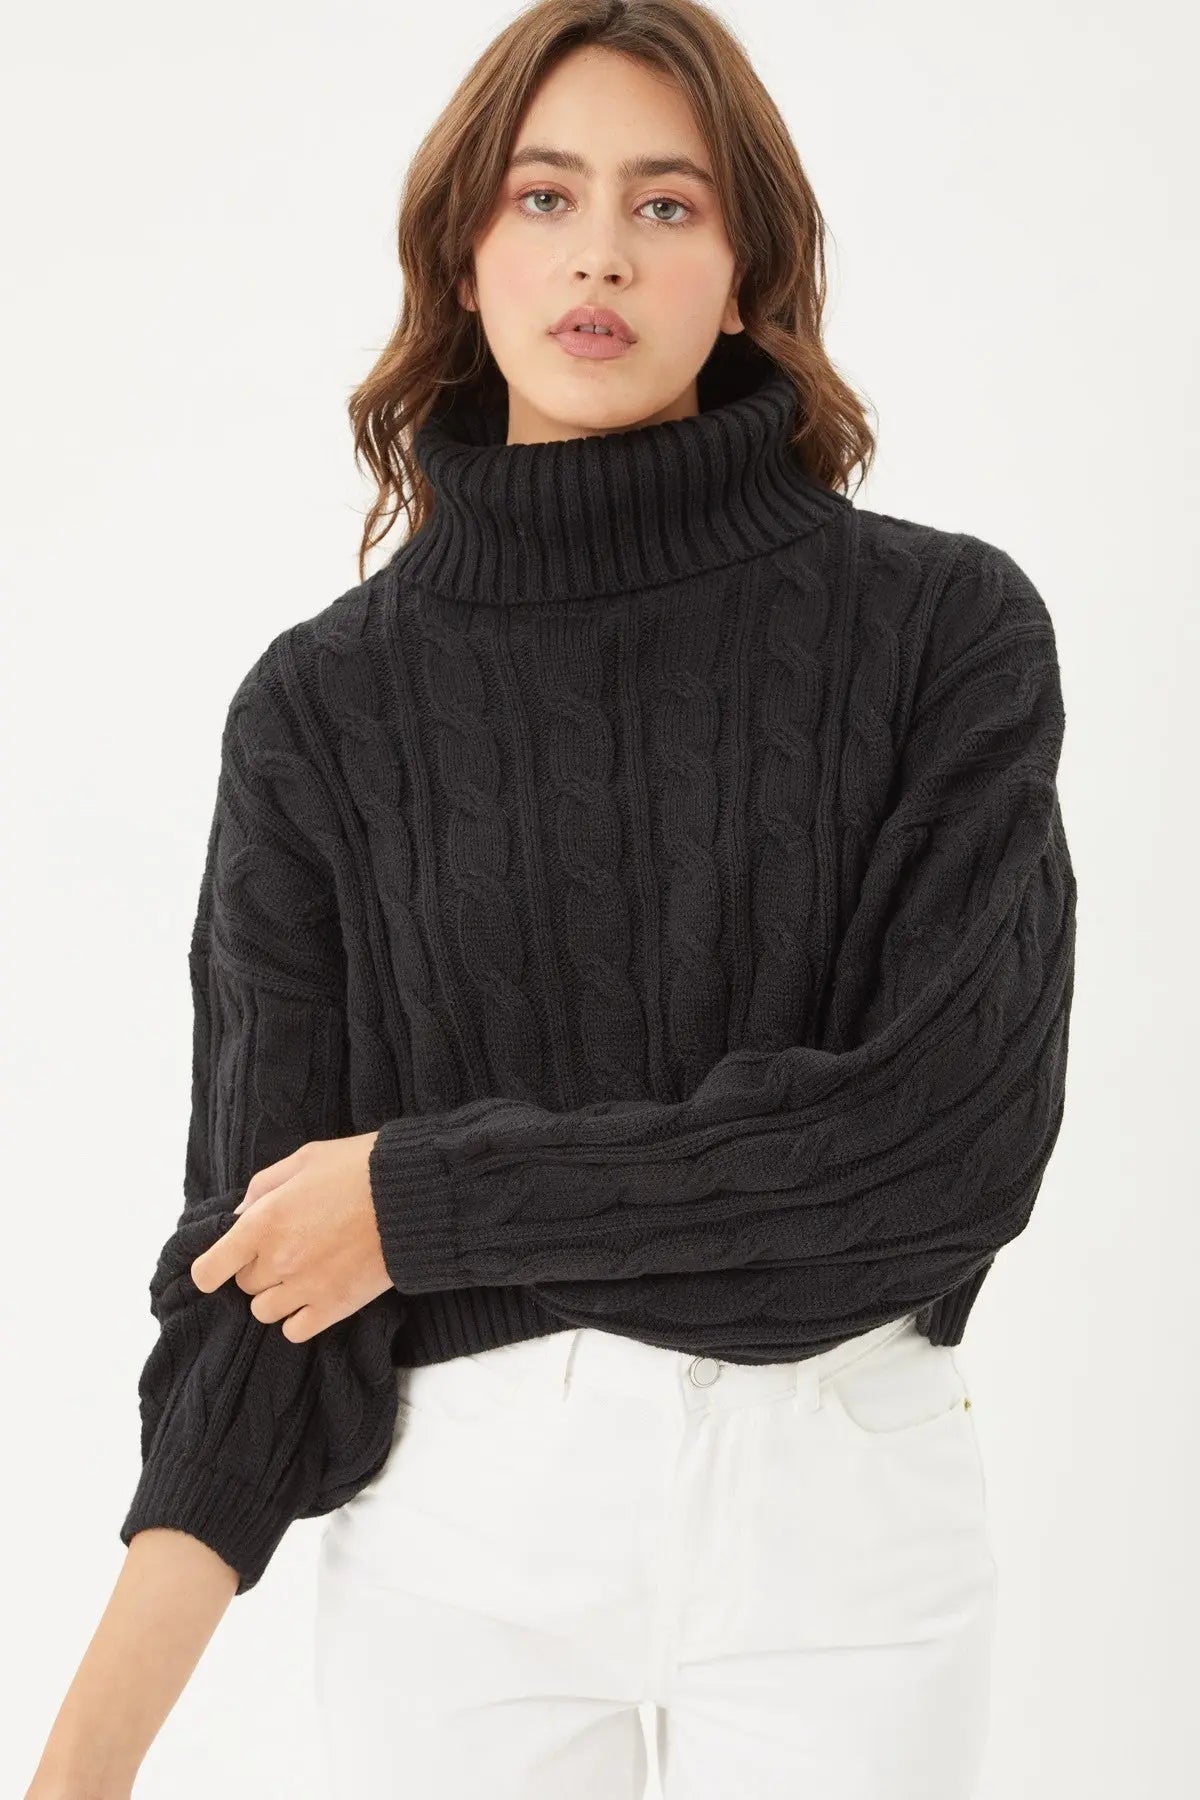 Turtle Neck Loose Fit Cable Knit Sweater Sunny EvE Fashion